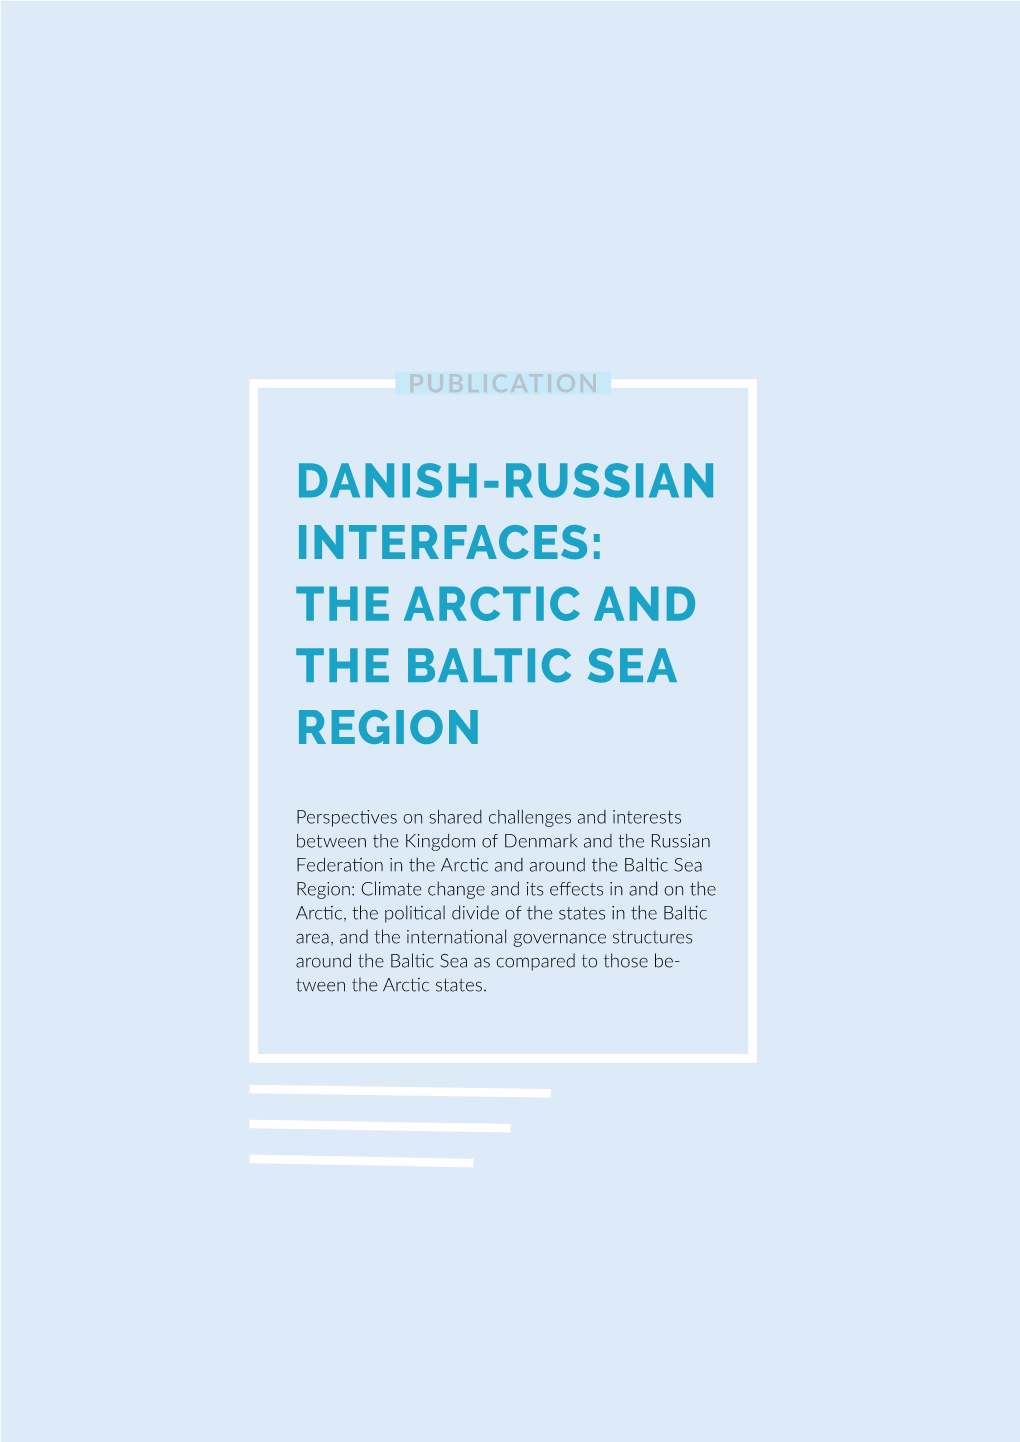 The Arctic and the Baltic Sea Region